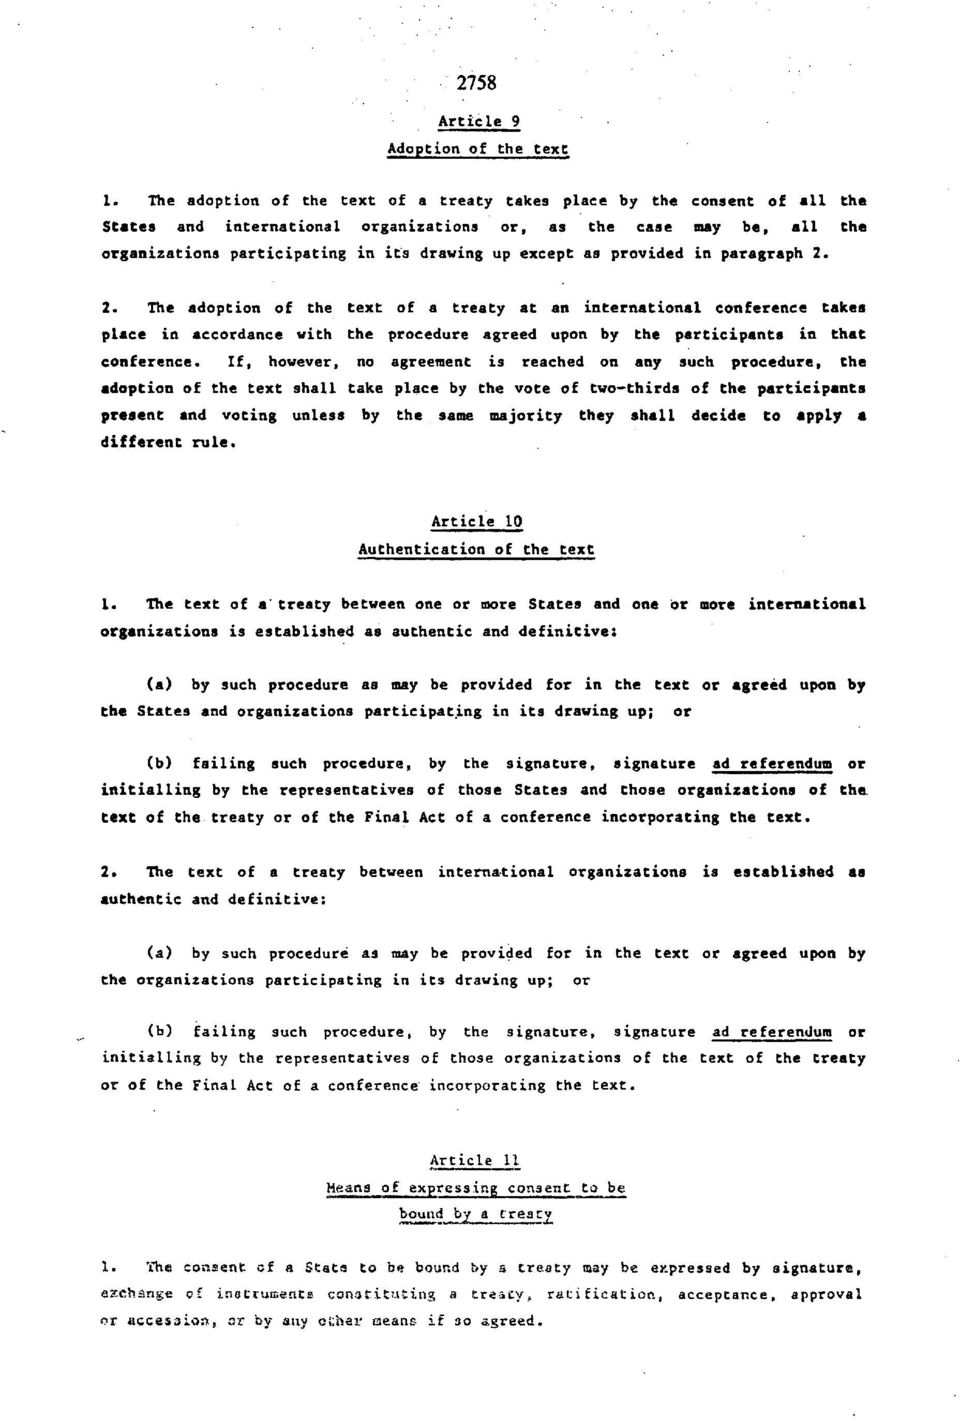 as provided in paragraph 2. 2. The adoption of the text of a treaty at an international conference takes place in accordance with the procedure agreed upon by the participants in that conference.